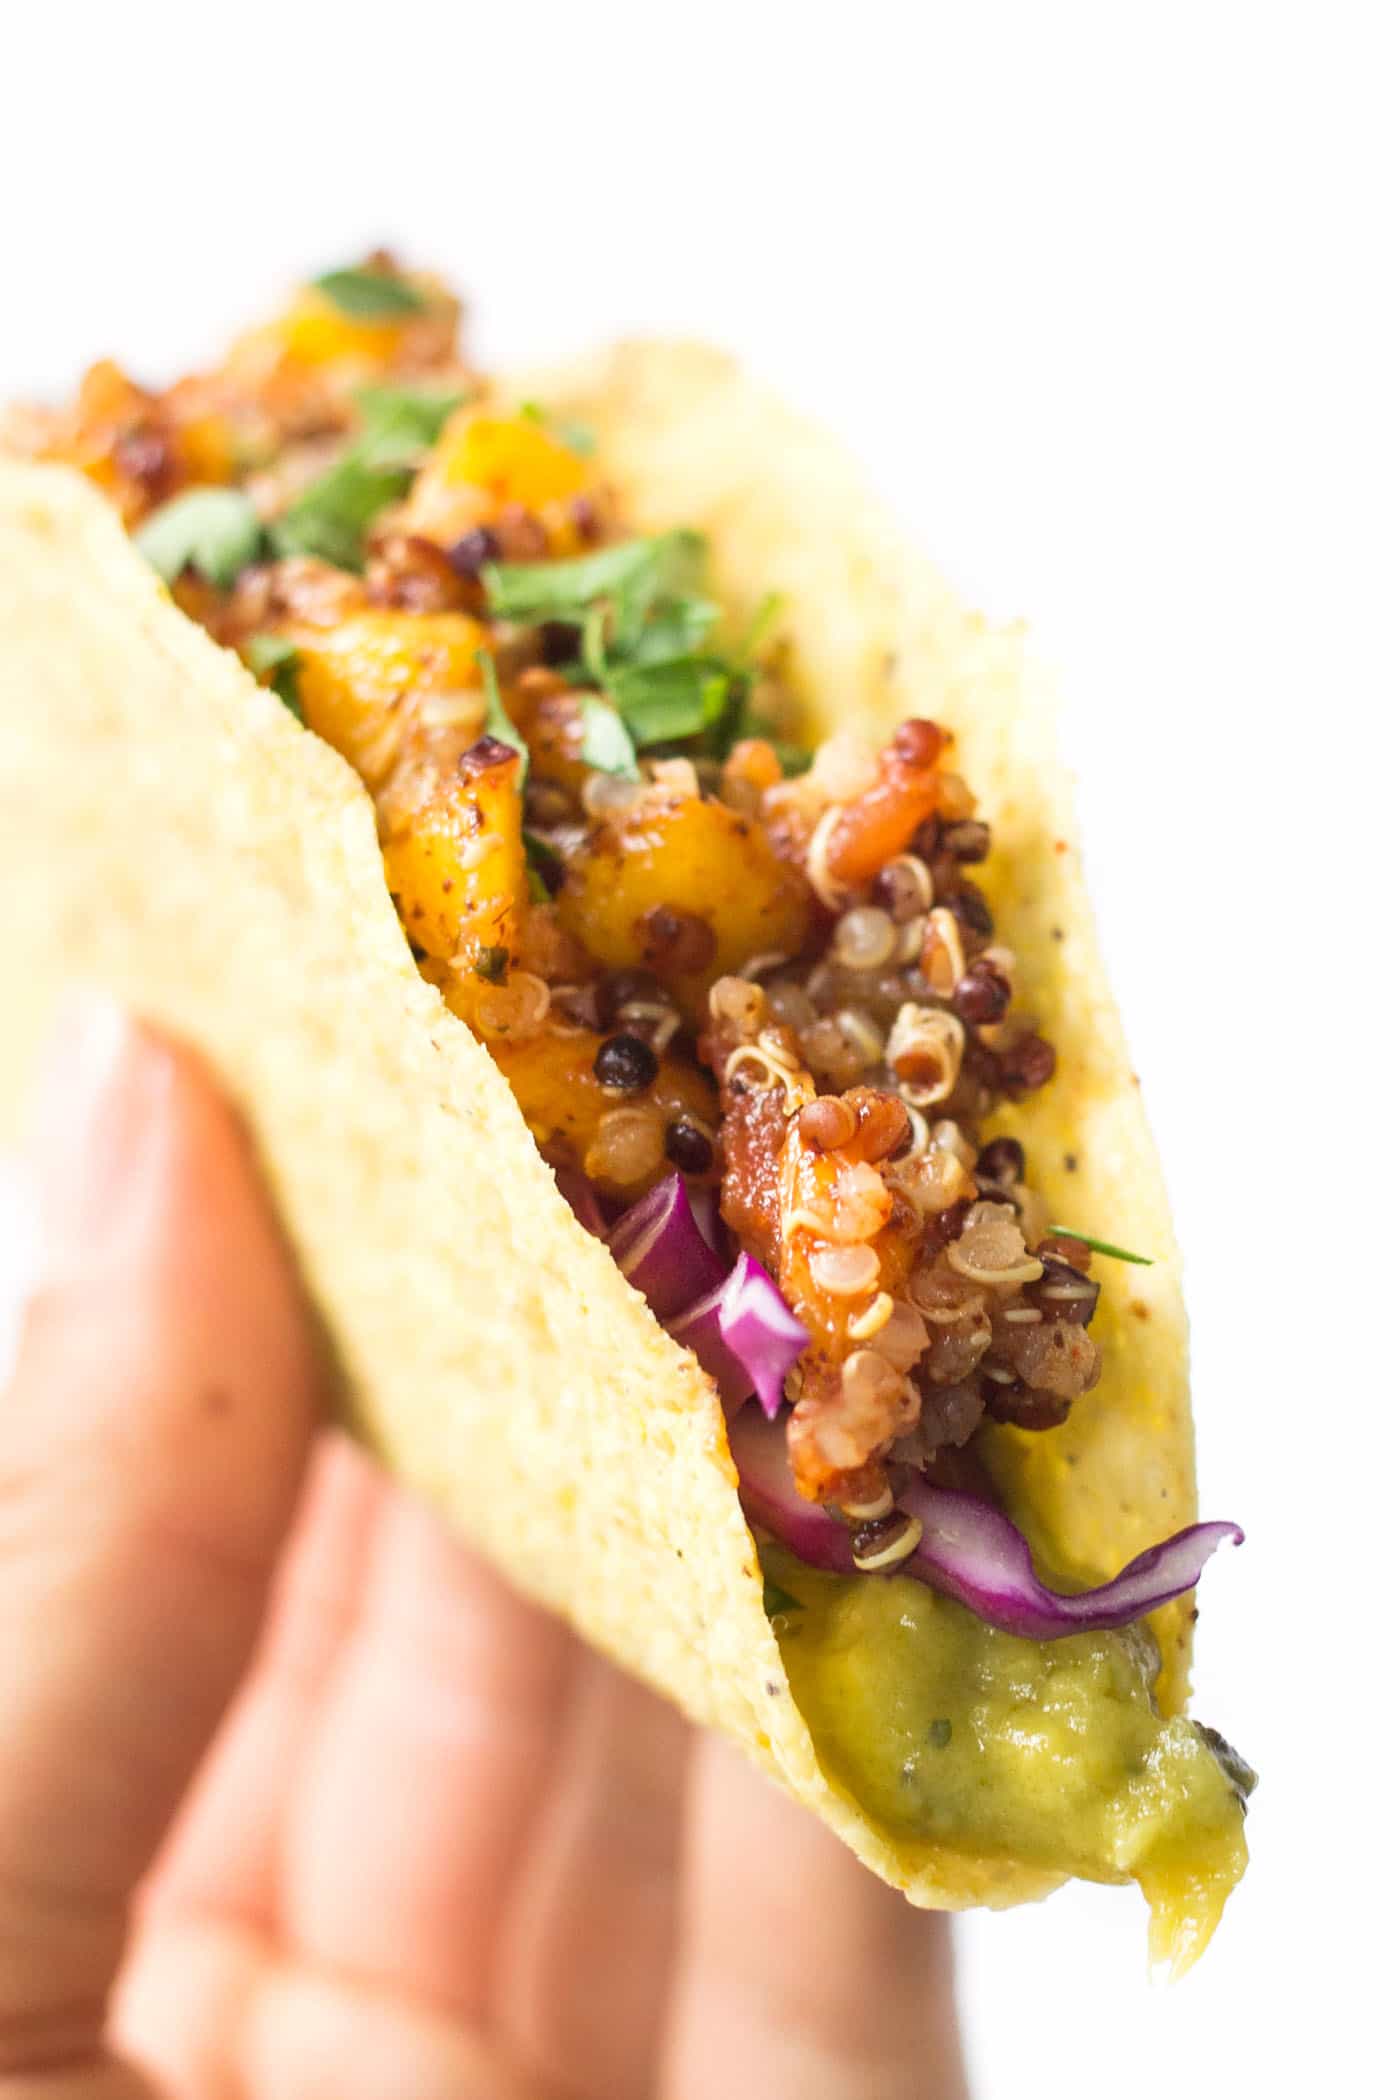 These super easy QUINOA TACOS are meatless, healthy and flavored with a spicy mango-lime filling!